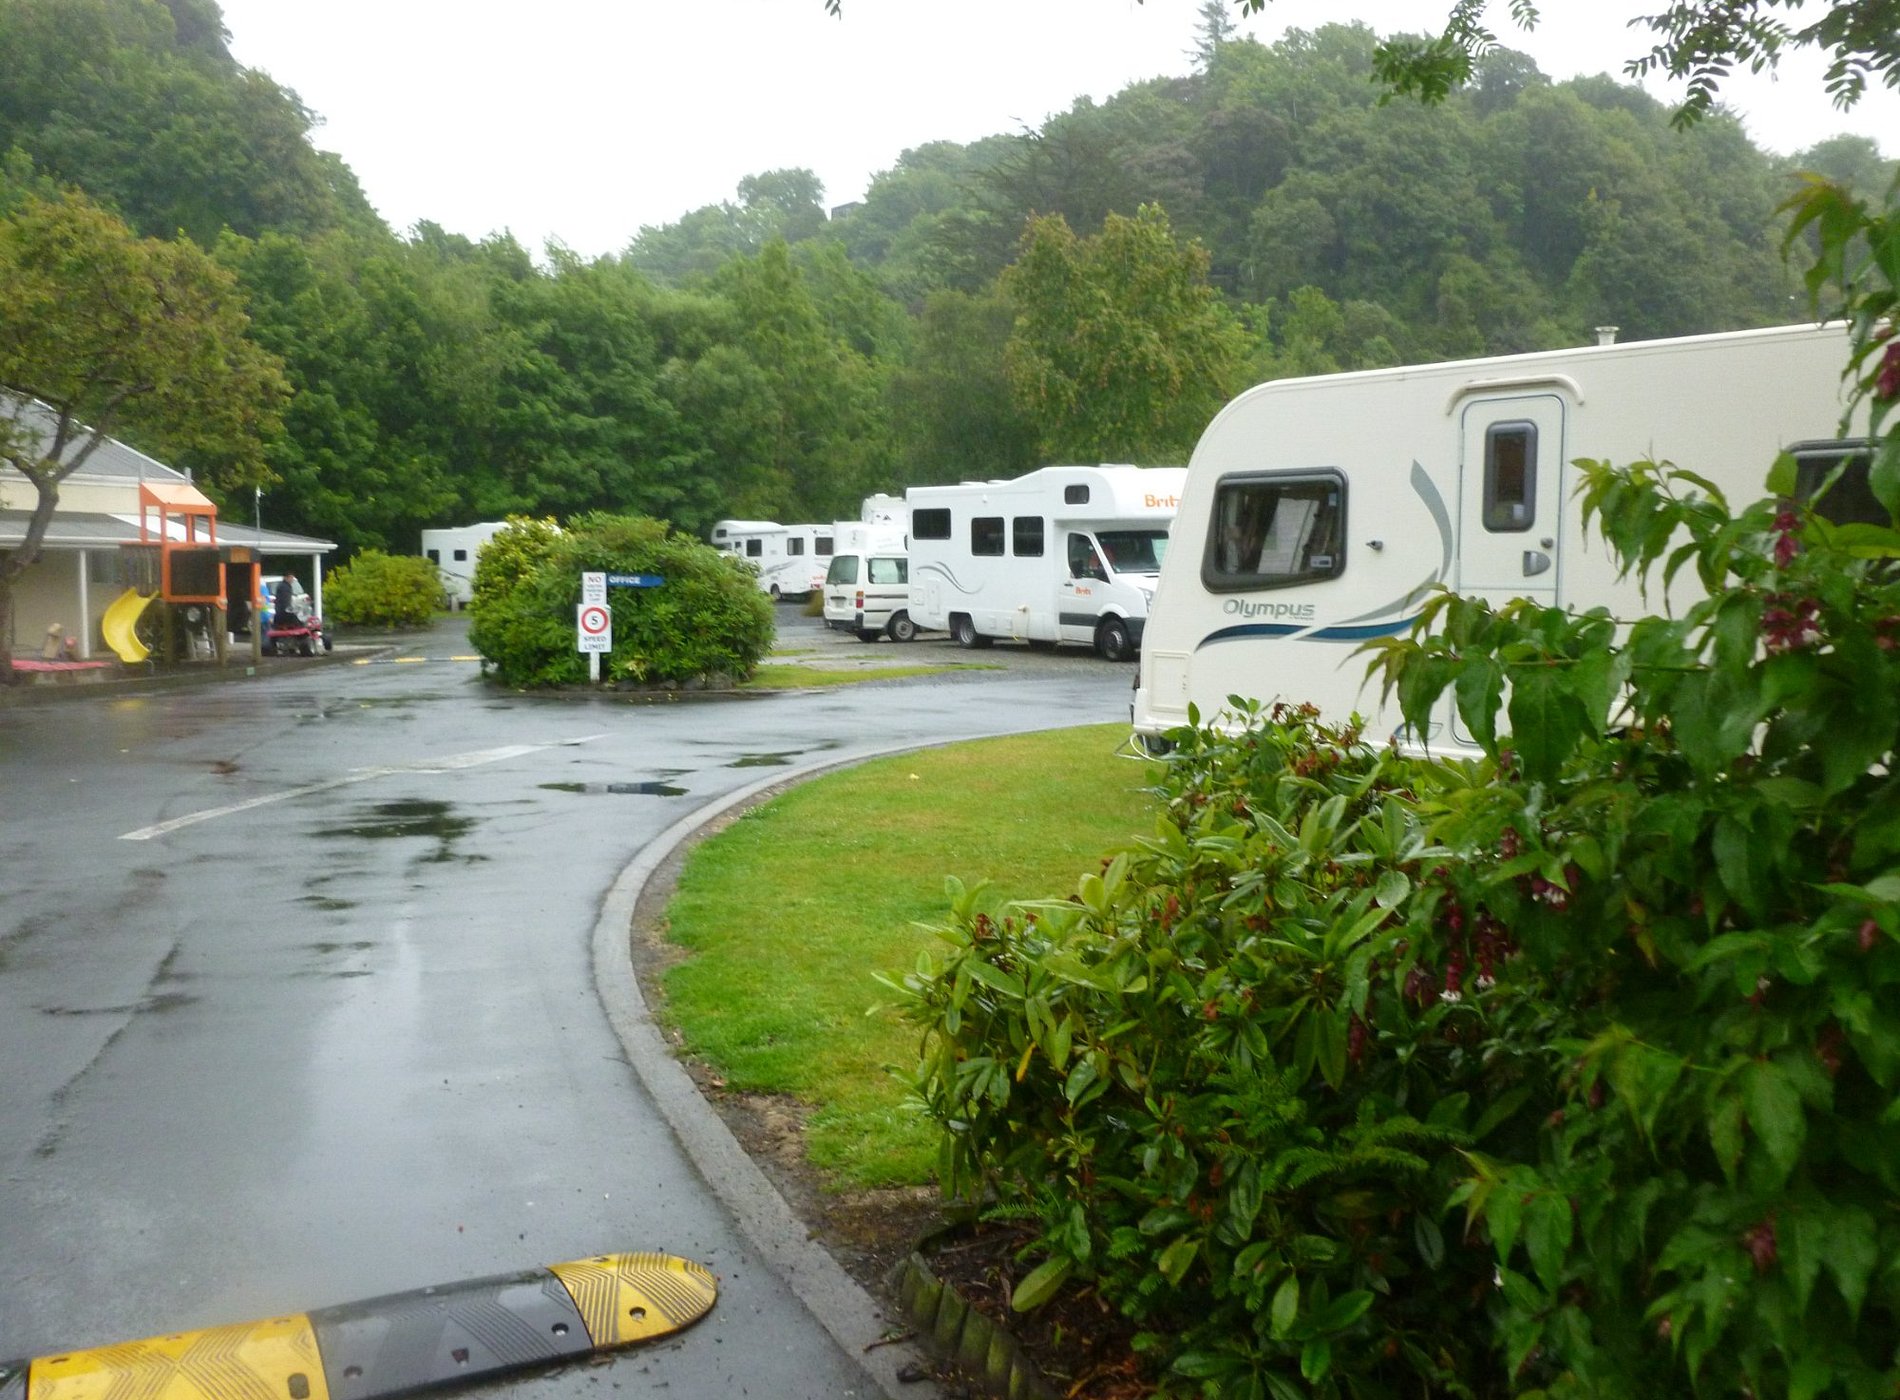 Leith Valley Holiday Park and Motels image